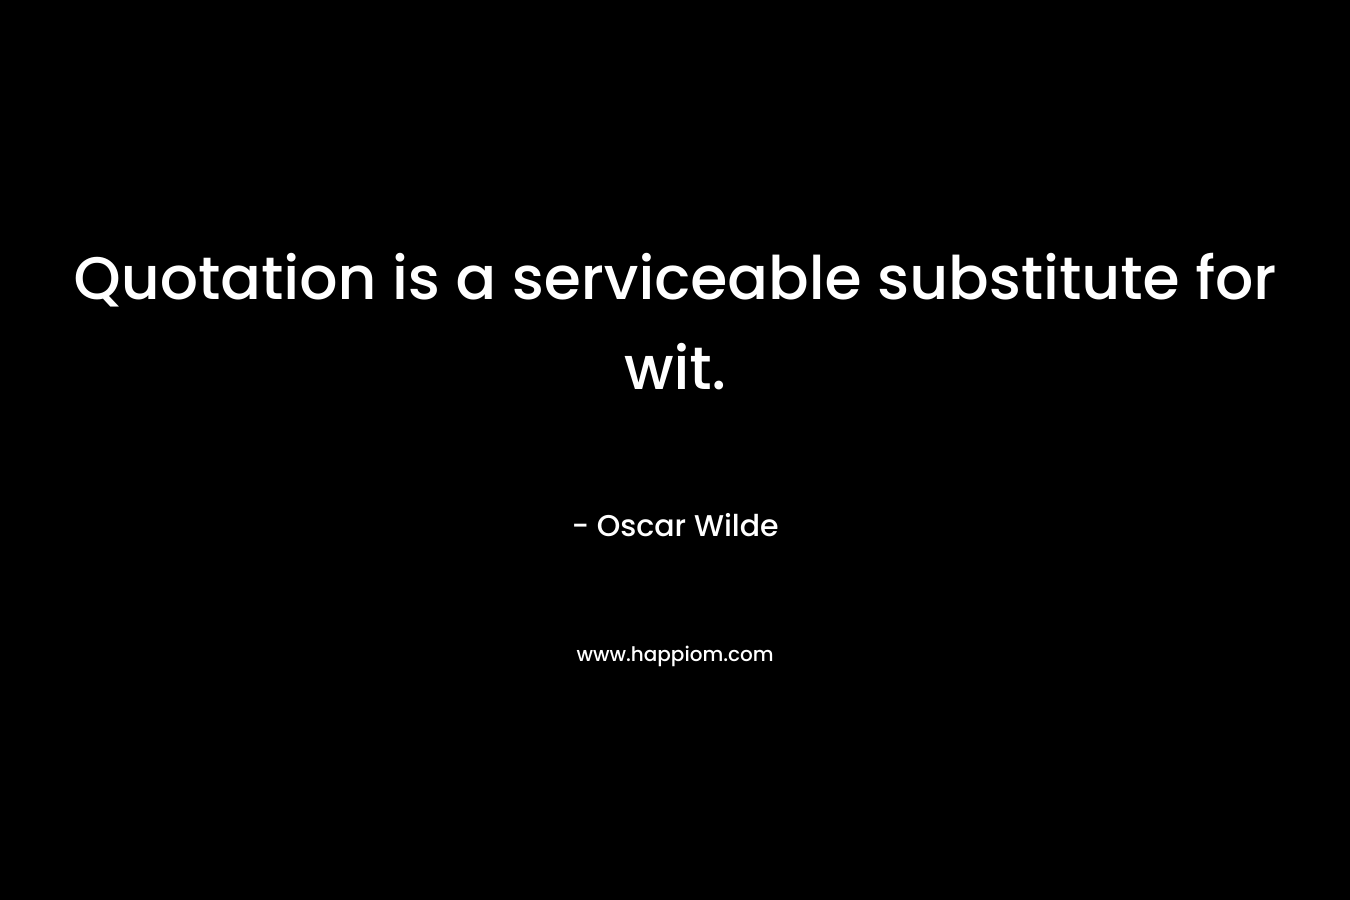 Quotation is a serviceable substitute for wit. – Oscar Wilde